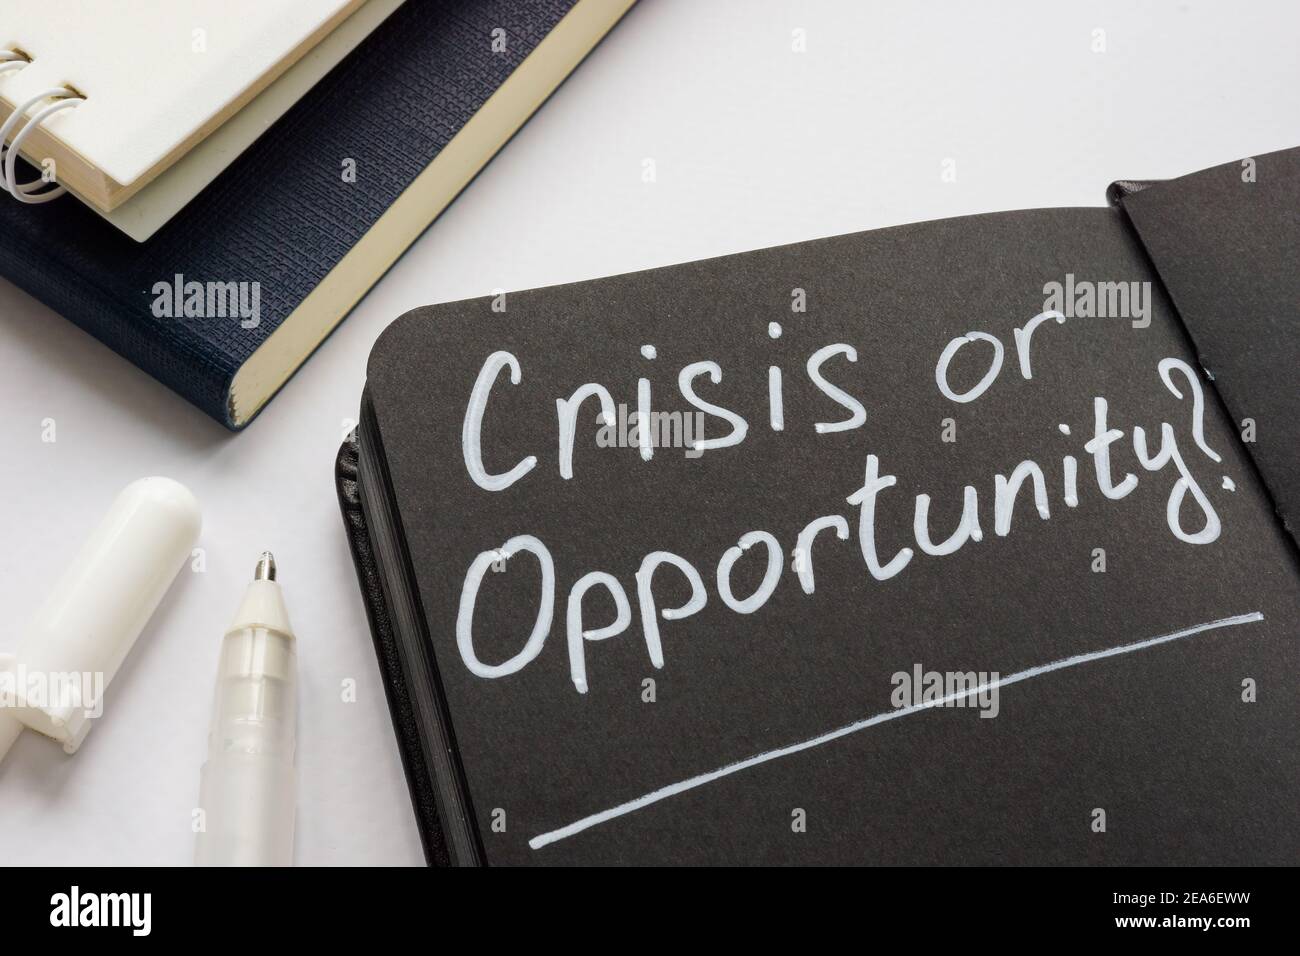 Crisis or opportunity question on the black page. Stock Photo